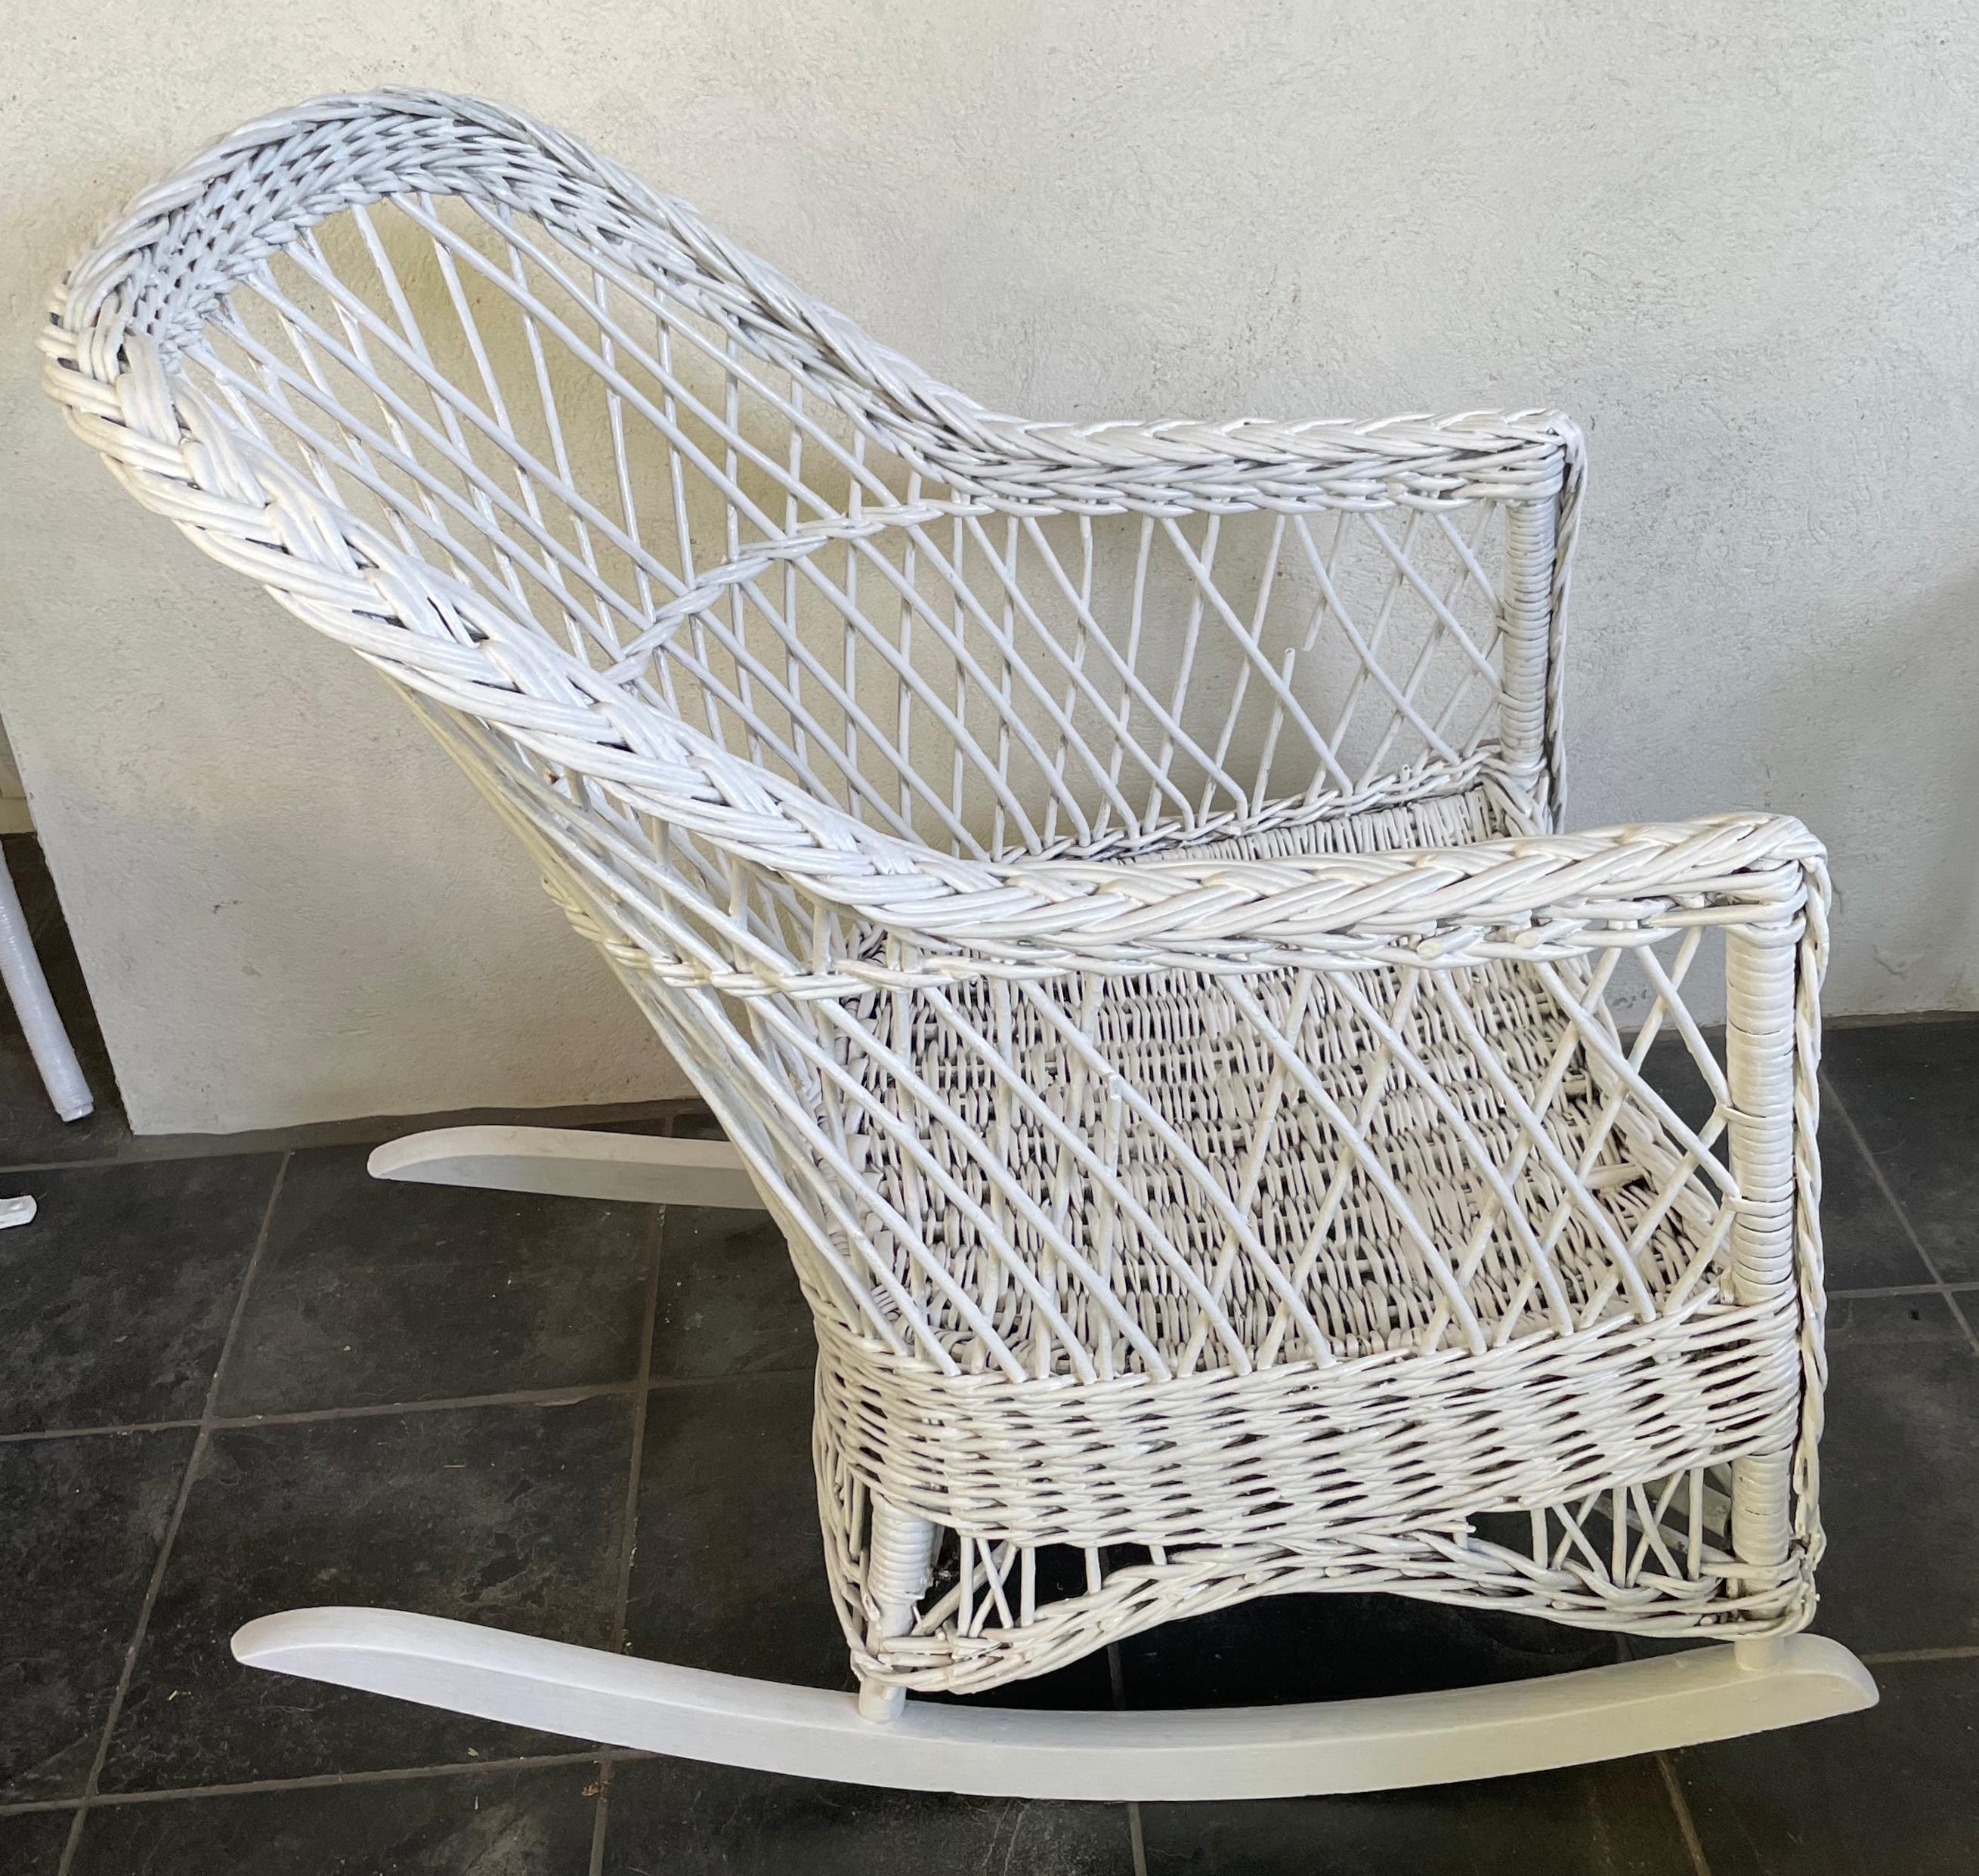 White wicker rocking chair. Vintage American sturdy white painted wicker rocker. See photos for vintage condition. United States, circa 1930's
Dimensions: 25” W x 36” D x 33” H; seat 19” wide x 19” deep x 17